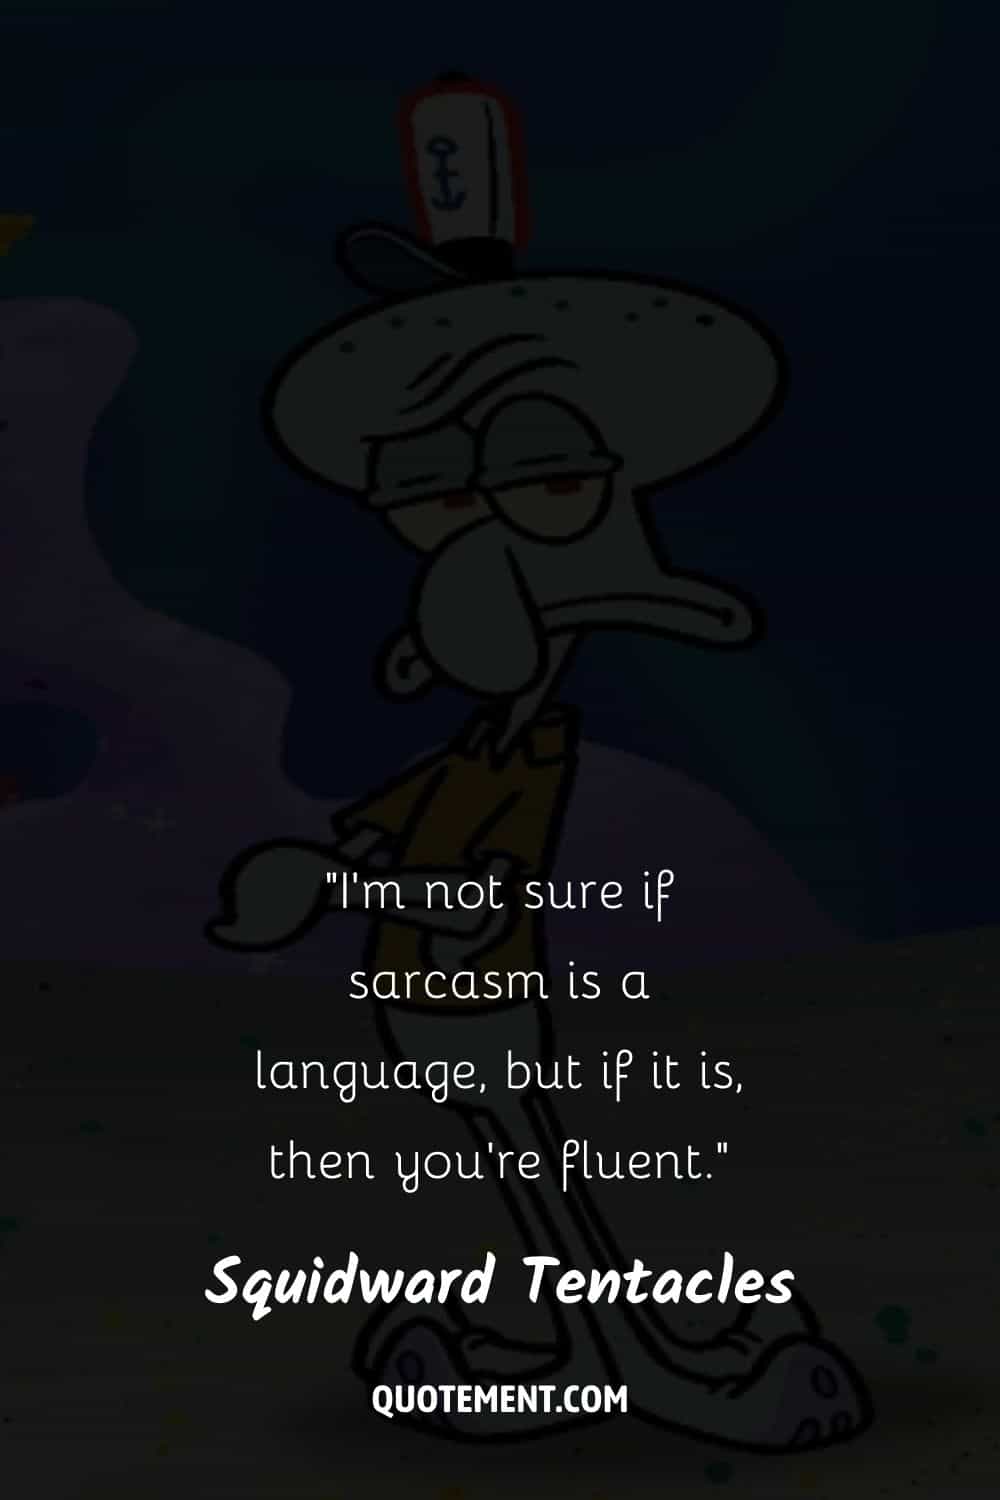 illustration of Squidward Tentacles with a sarcastic face expression